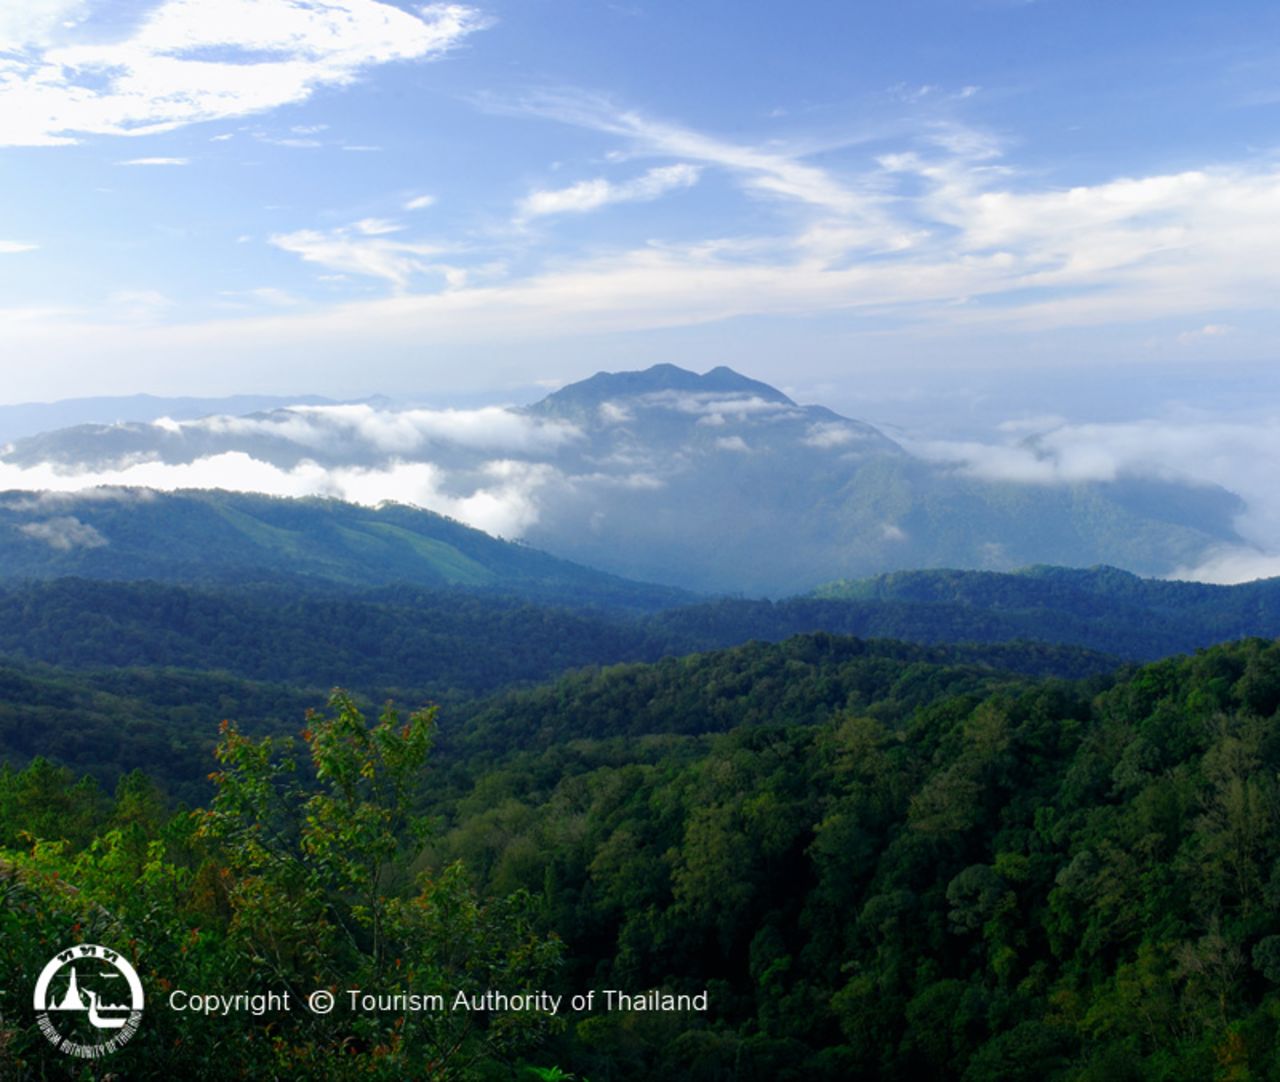 Named after its centerpiece and the highest peak in the country, Doi Inthanon National Park offers waterfall and cave attractions by day and stargazing by night.